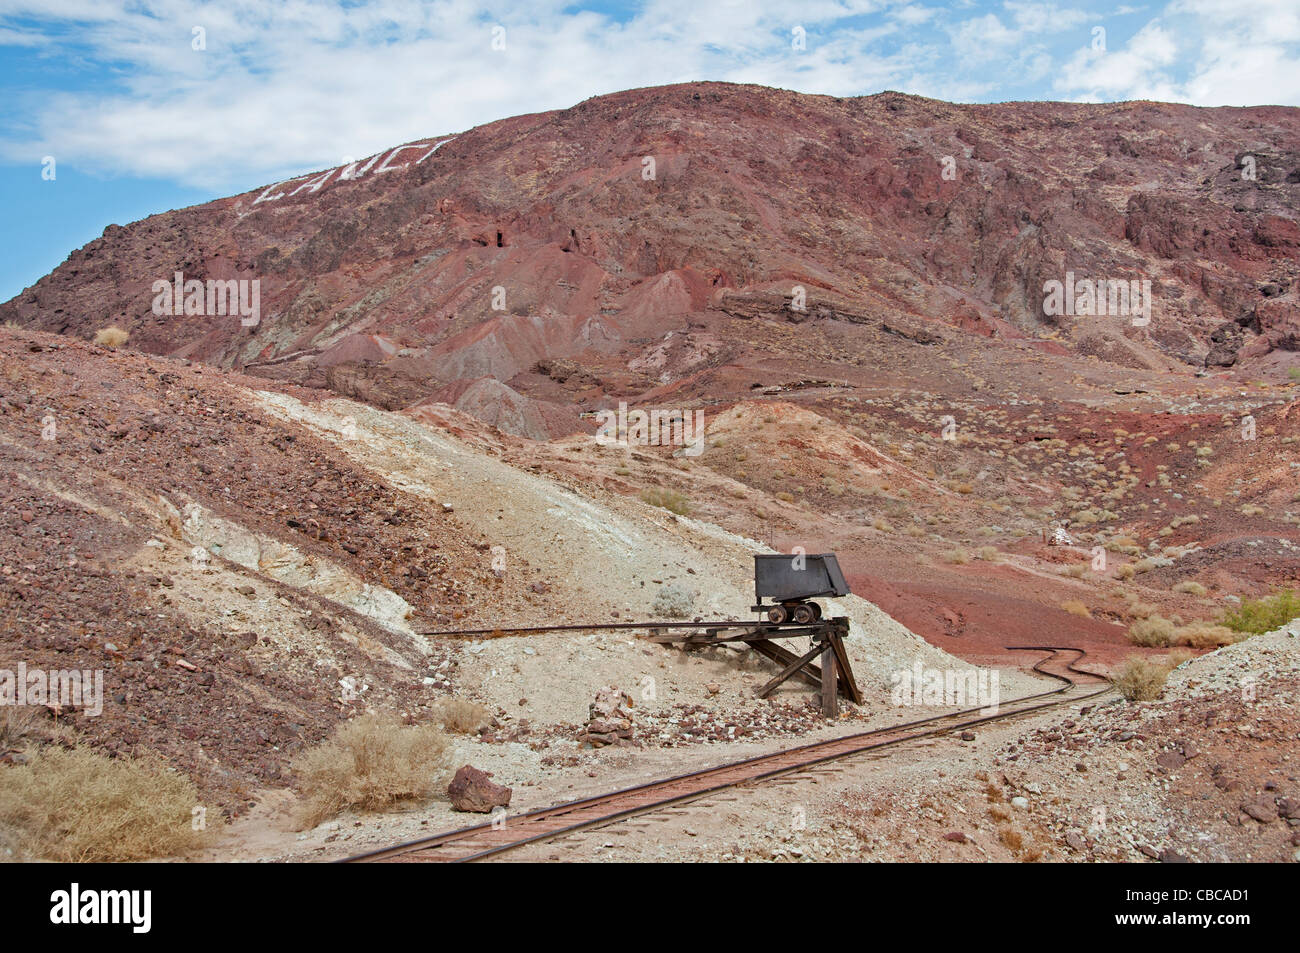 Barstow Californie Calico ghost town old silver mining gold rush California United States Banque D'Images